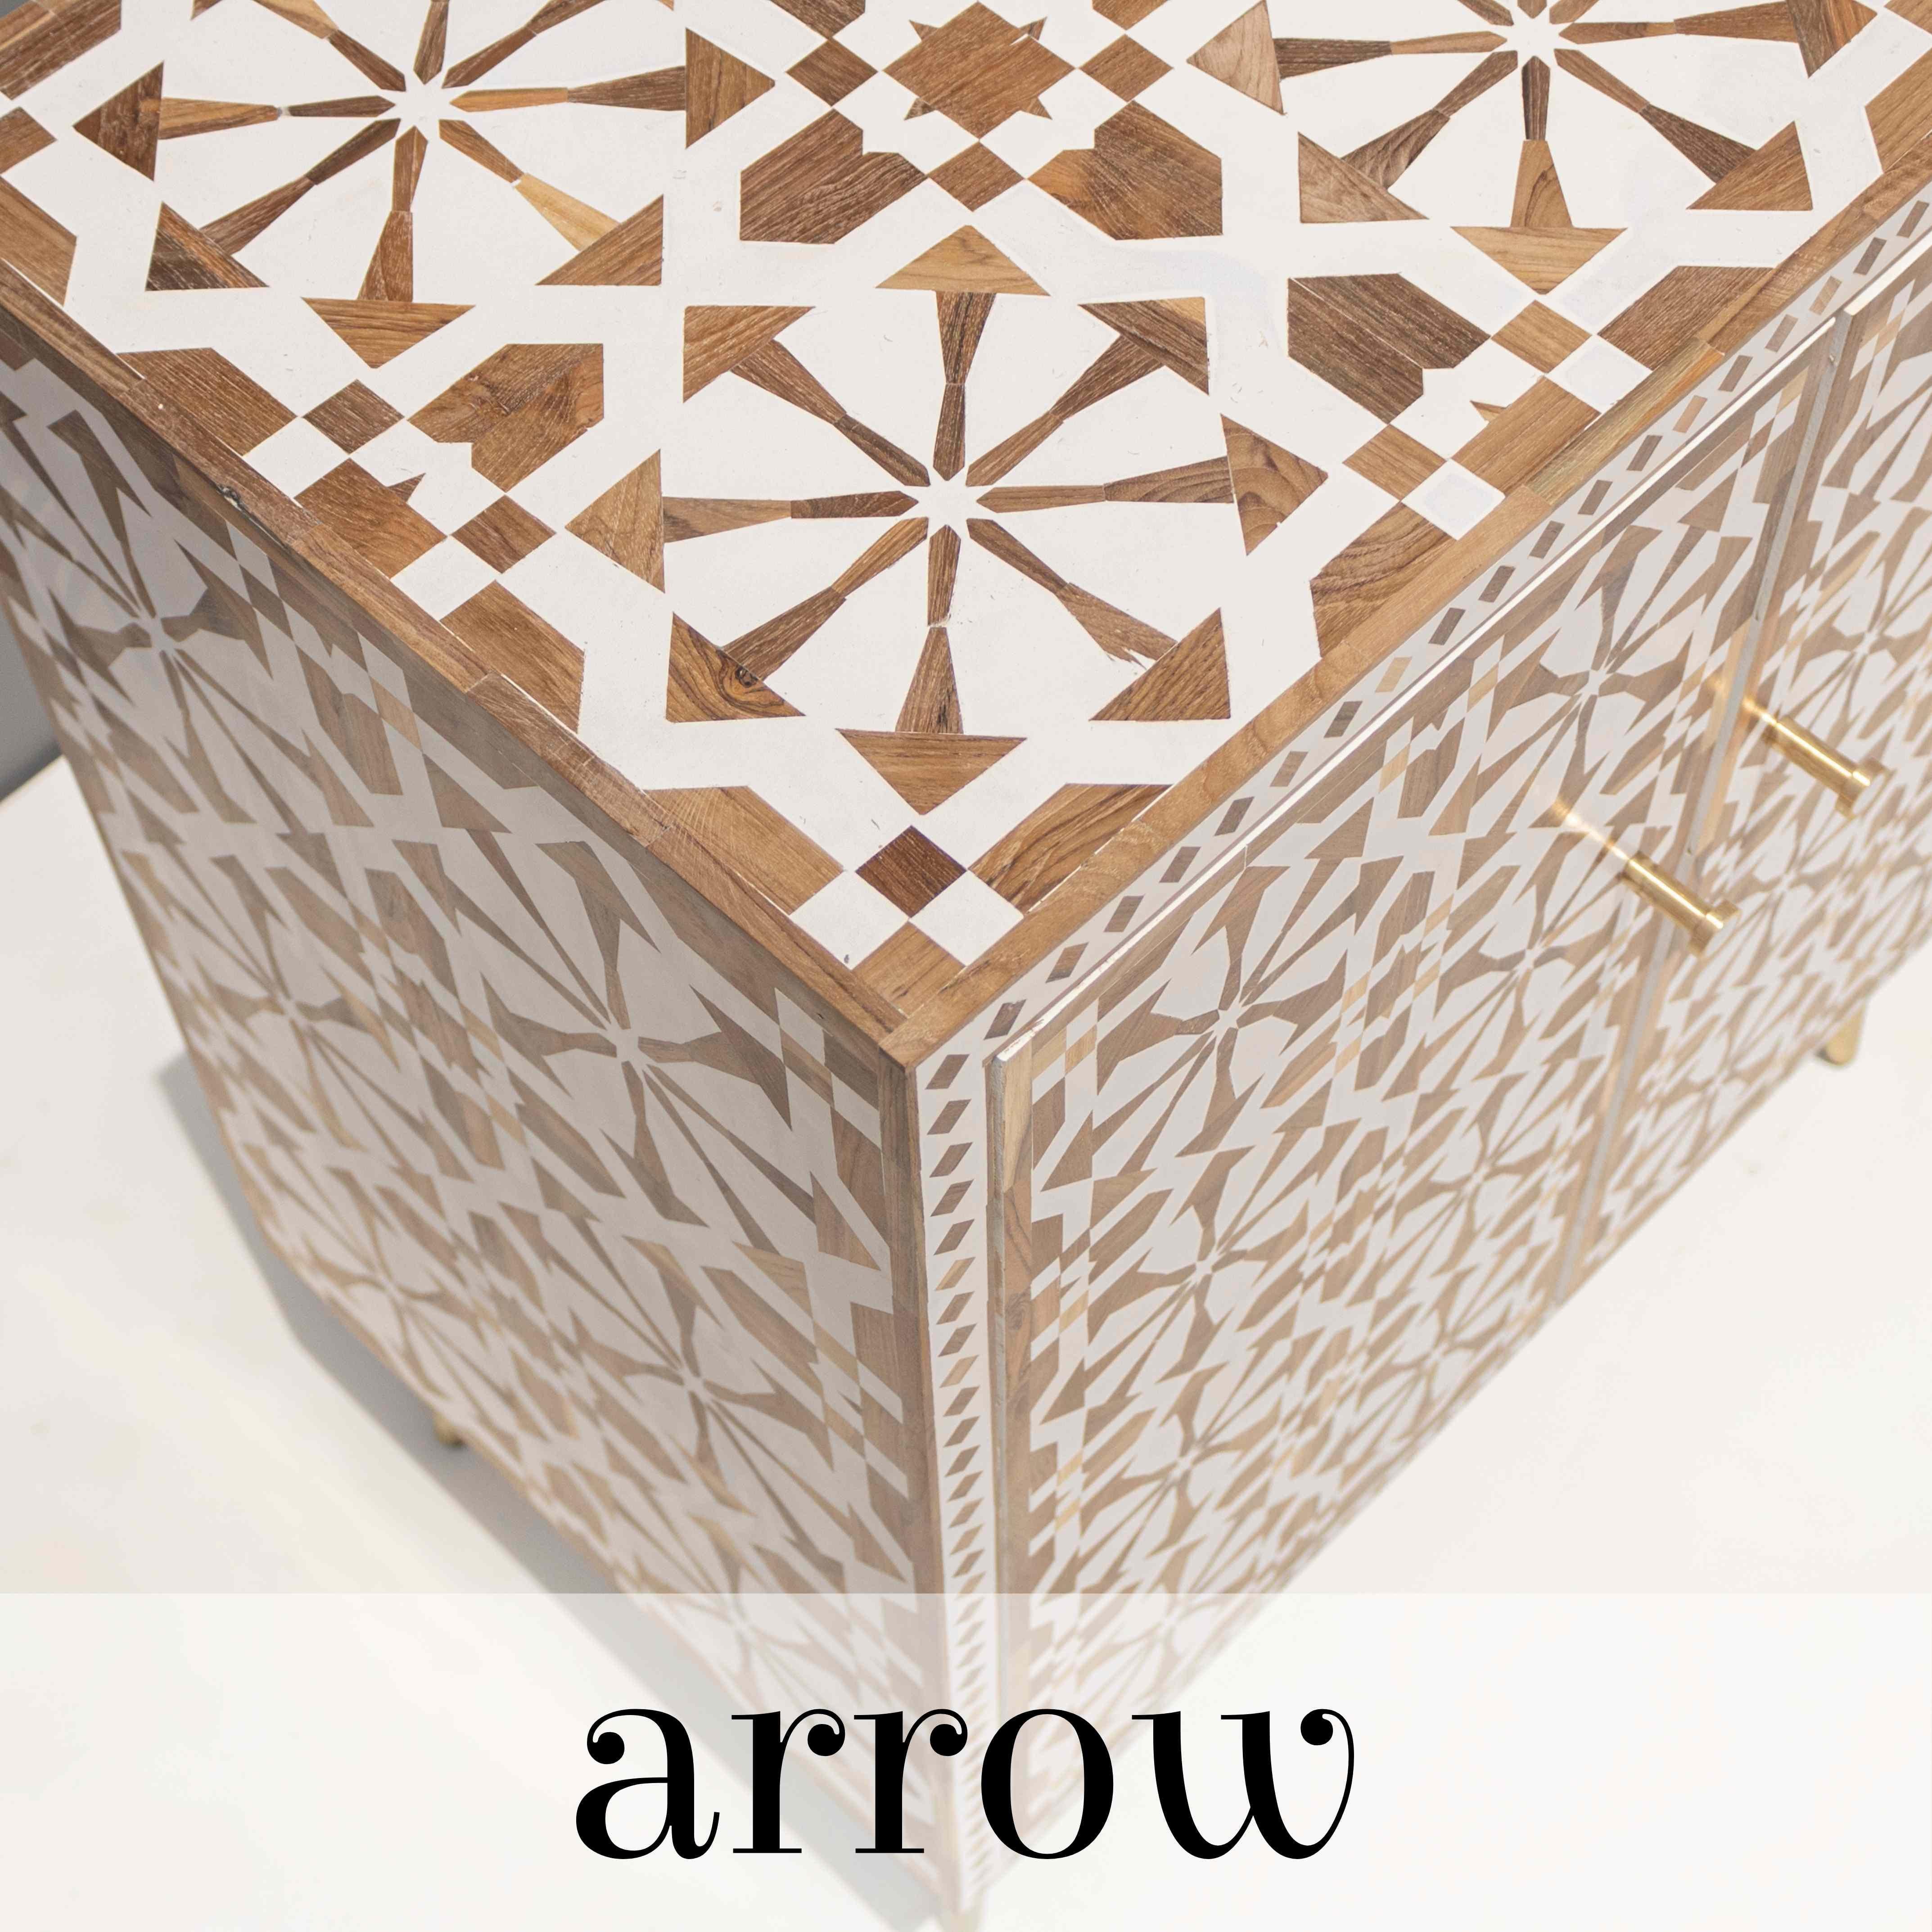 This stunning cabinet is handmade, featuring intricate teak wood inlay arrow patterns look spectacular. The cabinet is not only visually stunning but also highly functional offering ample storage space for your essentials. Crafted to last for